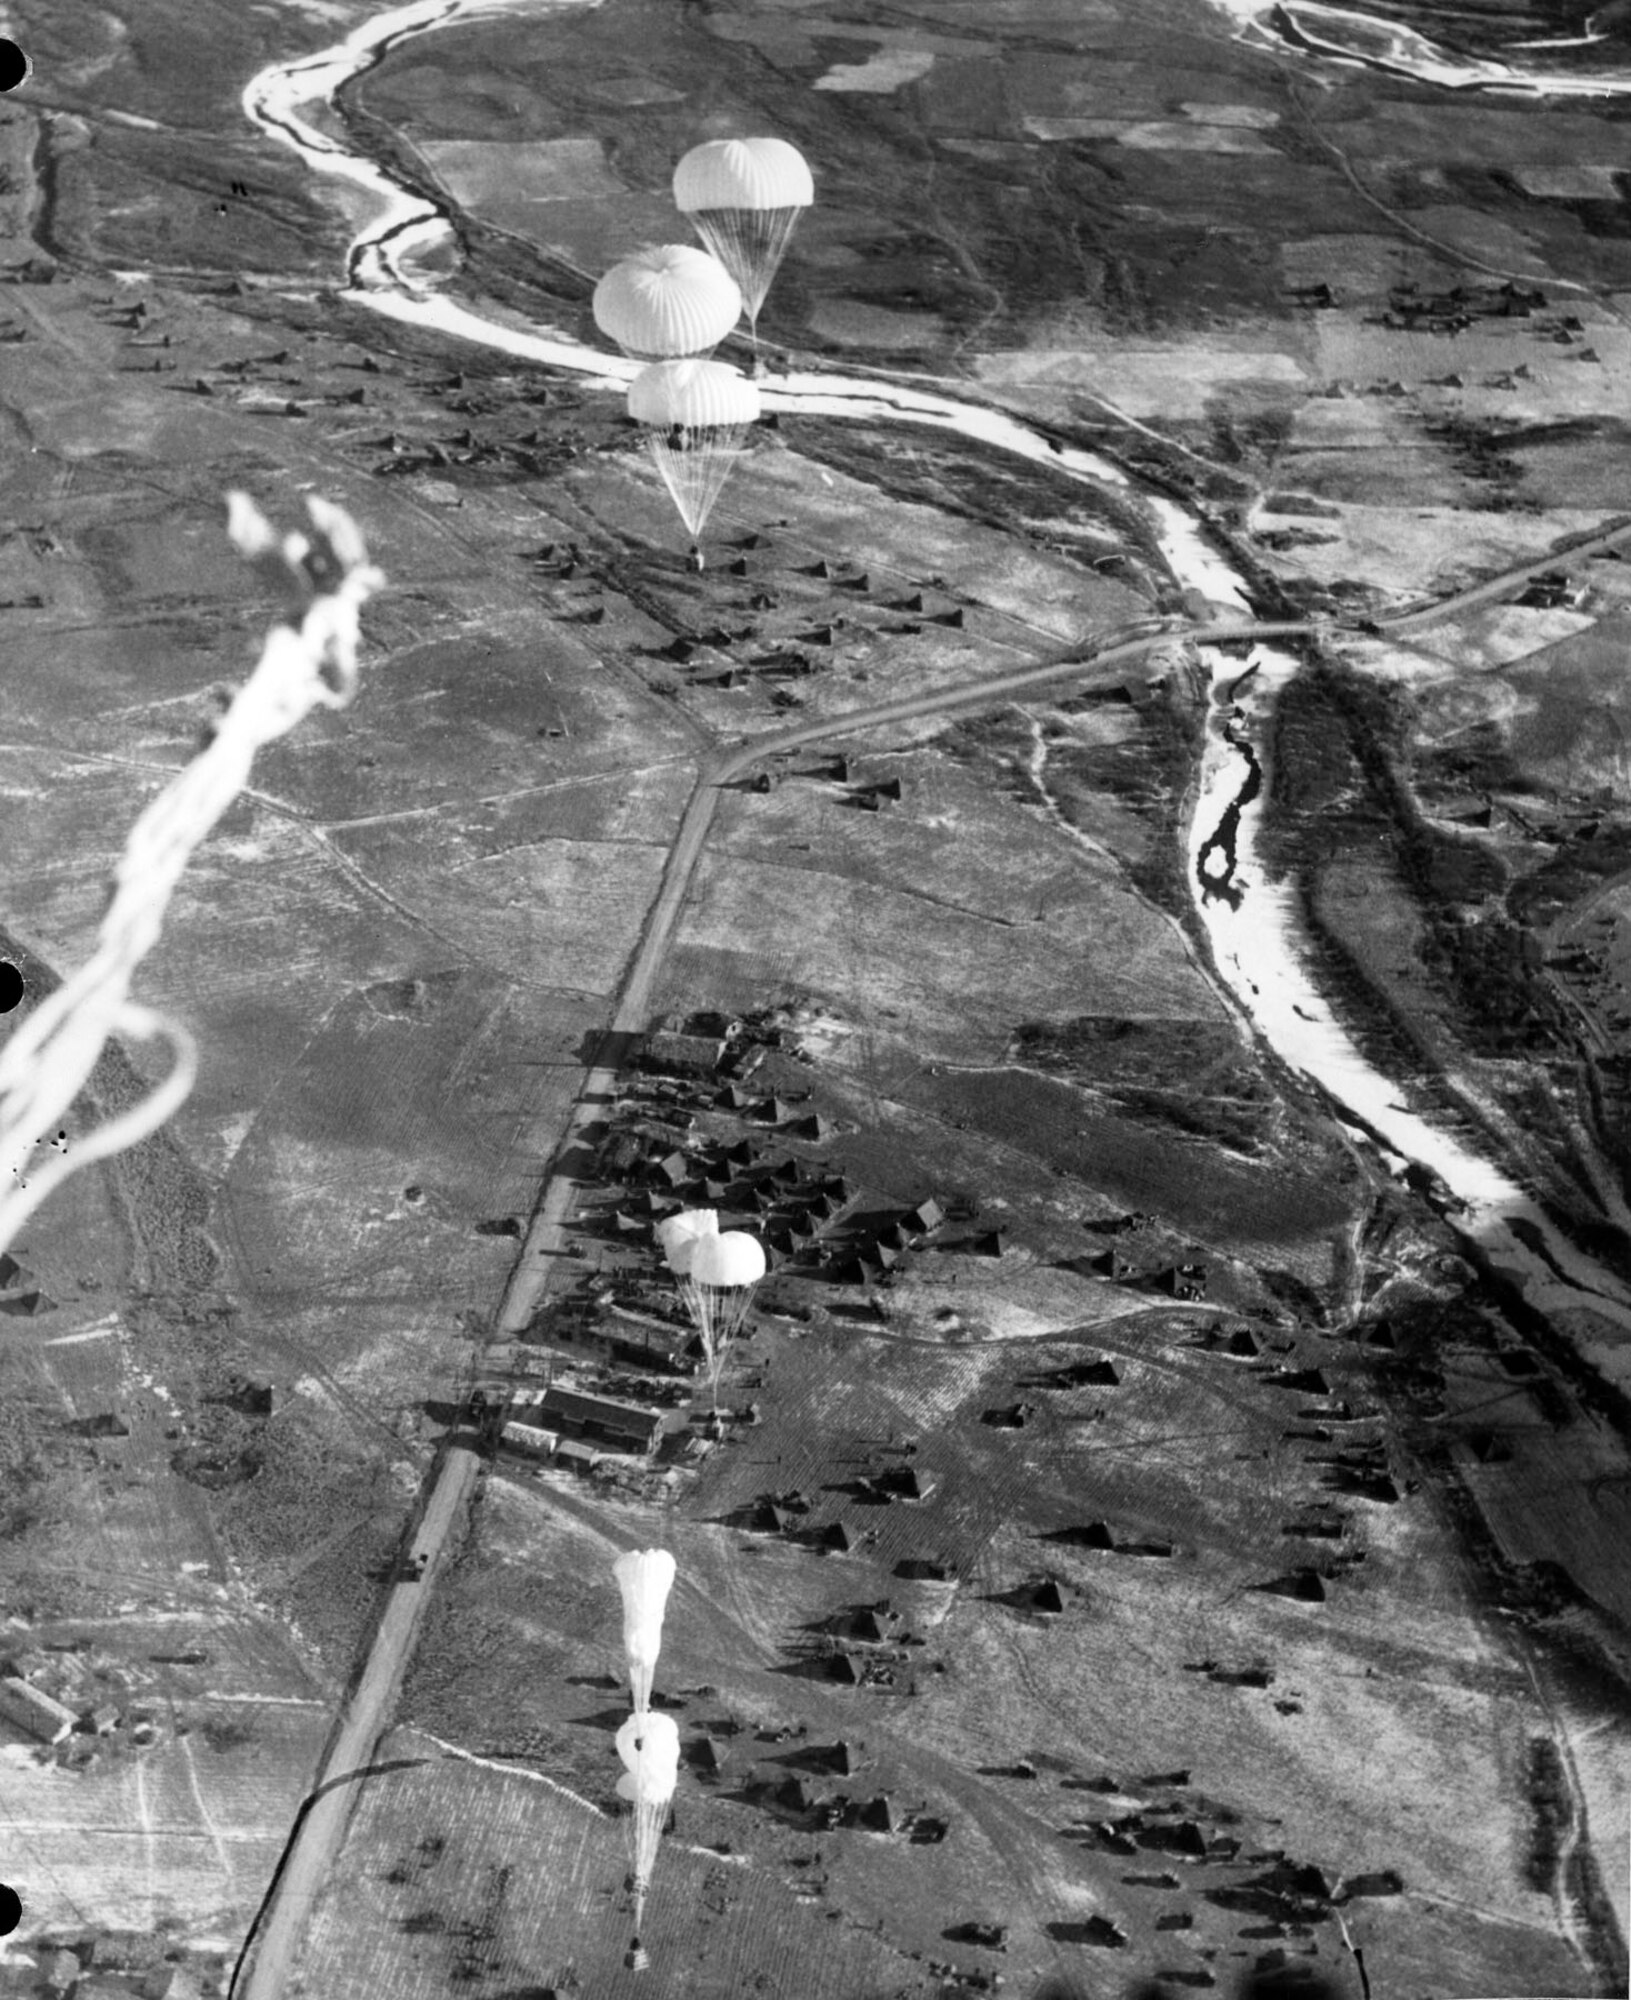 Airdropped supplies descend to U.S. and allied troops. Aerial resupply was critical in Korea, and Combat Cargo refined its techniques throughout the war. (U.S. Air Force photo)